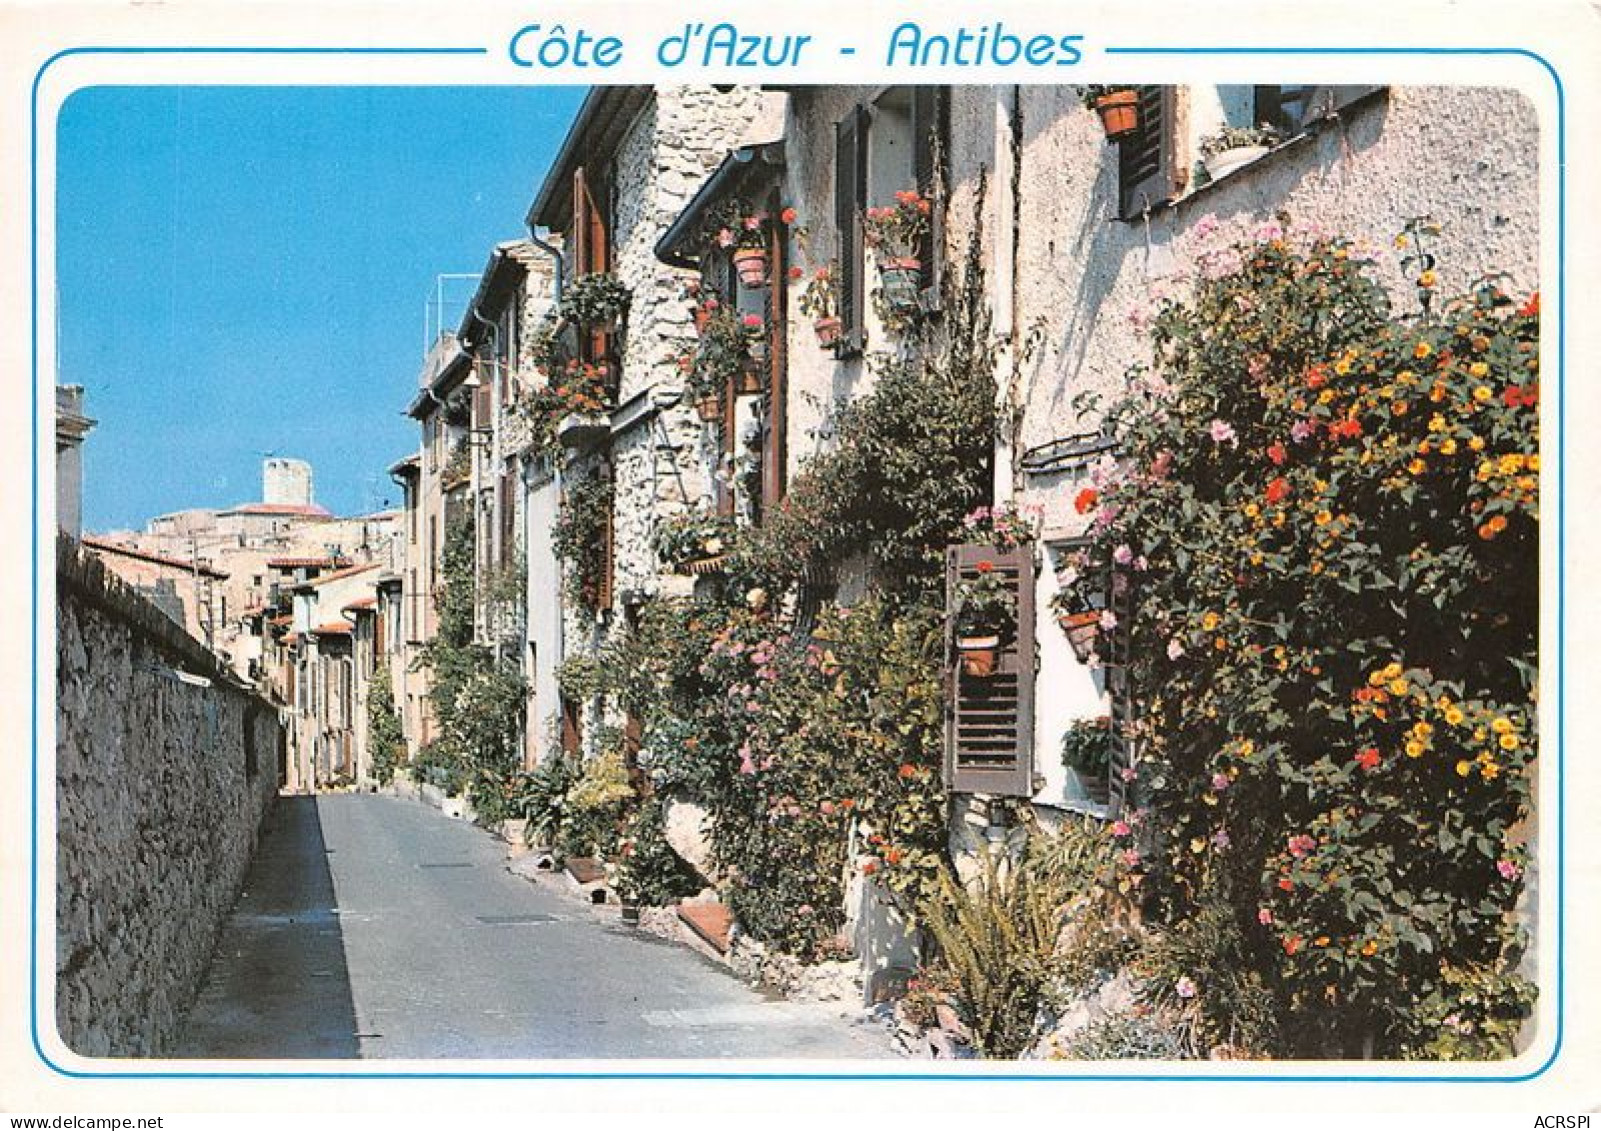 ANTIBES Une Vieille Rue Pittoresque Et Fleurie 21(scan Recto-verso) MA1434 - Antibes - Old Town